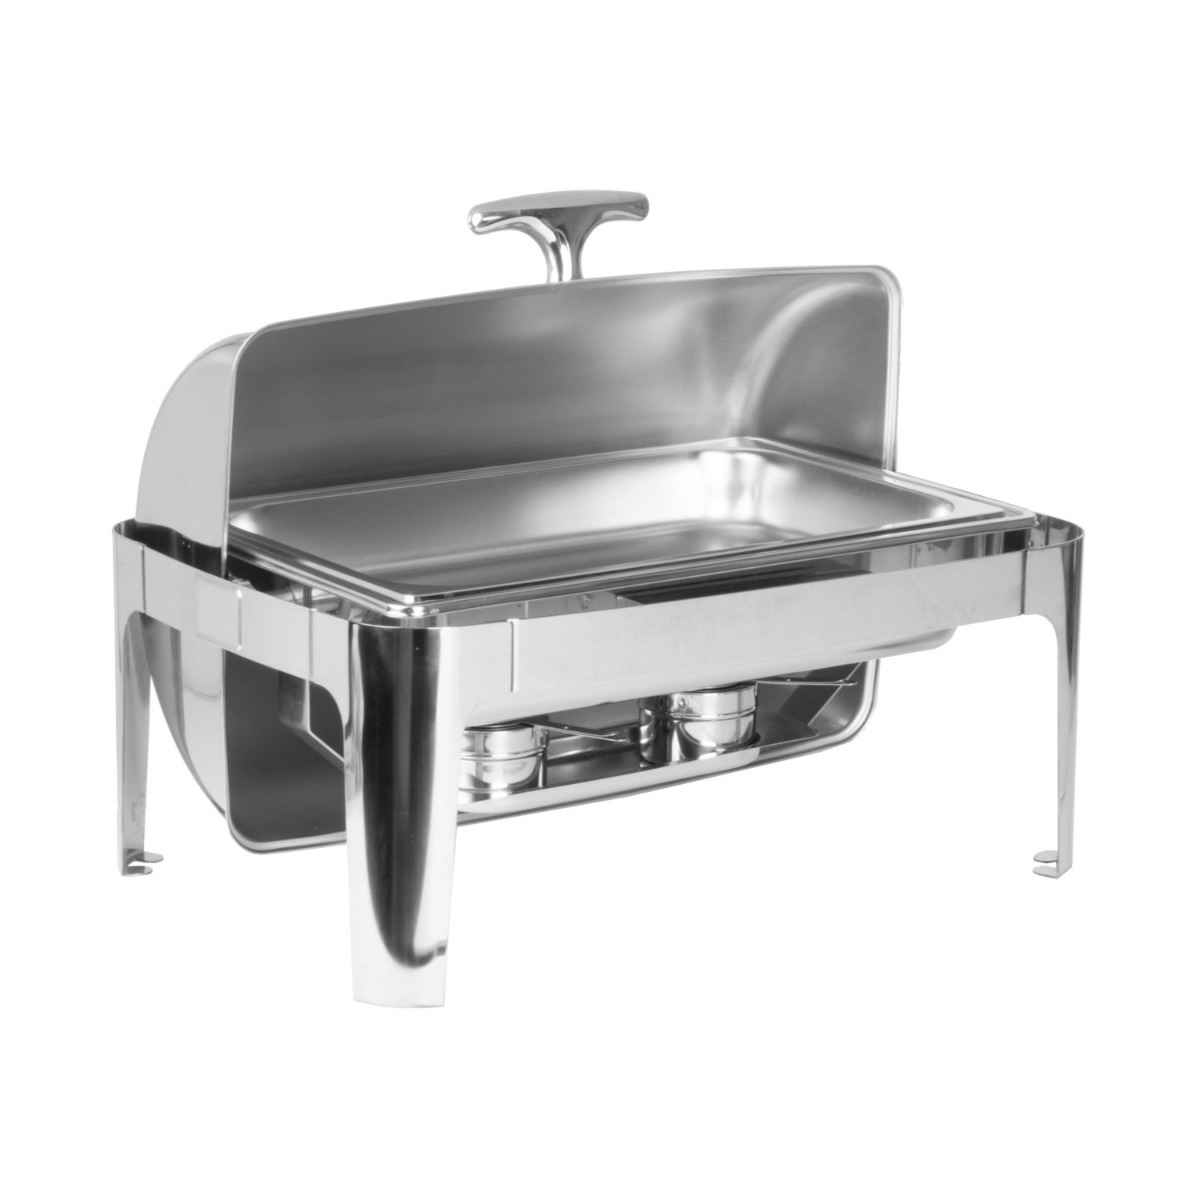 Chefset Chafing Dish Roll Top